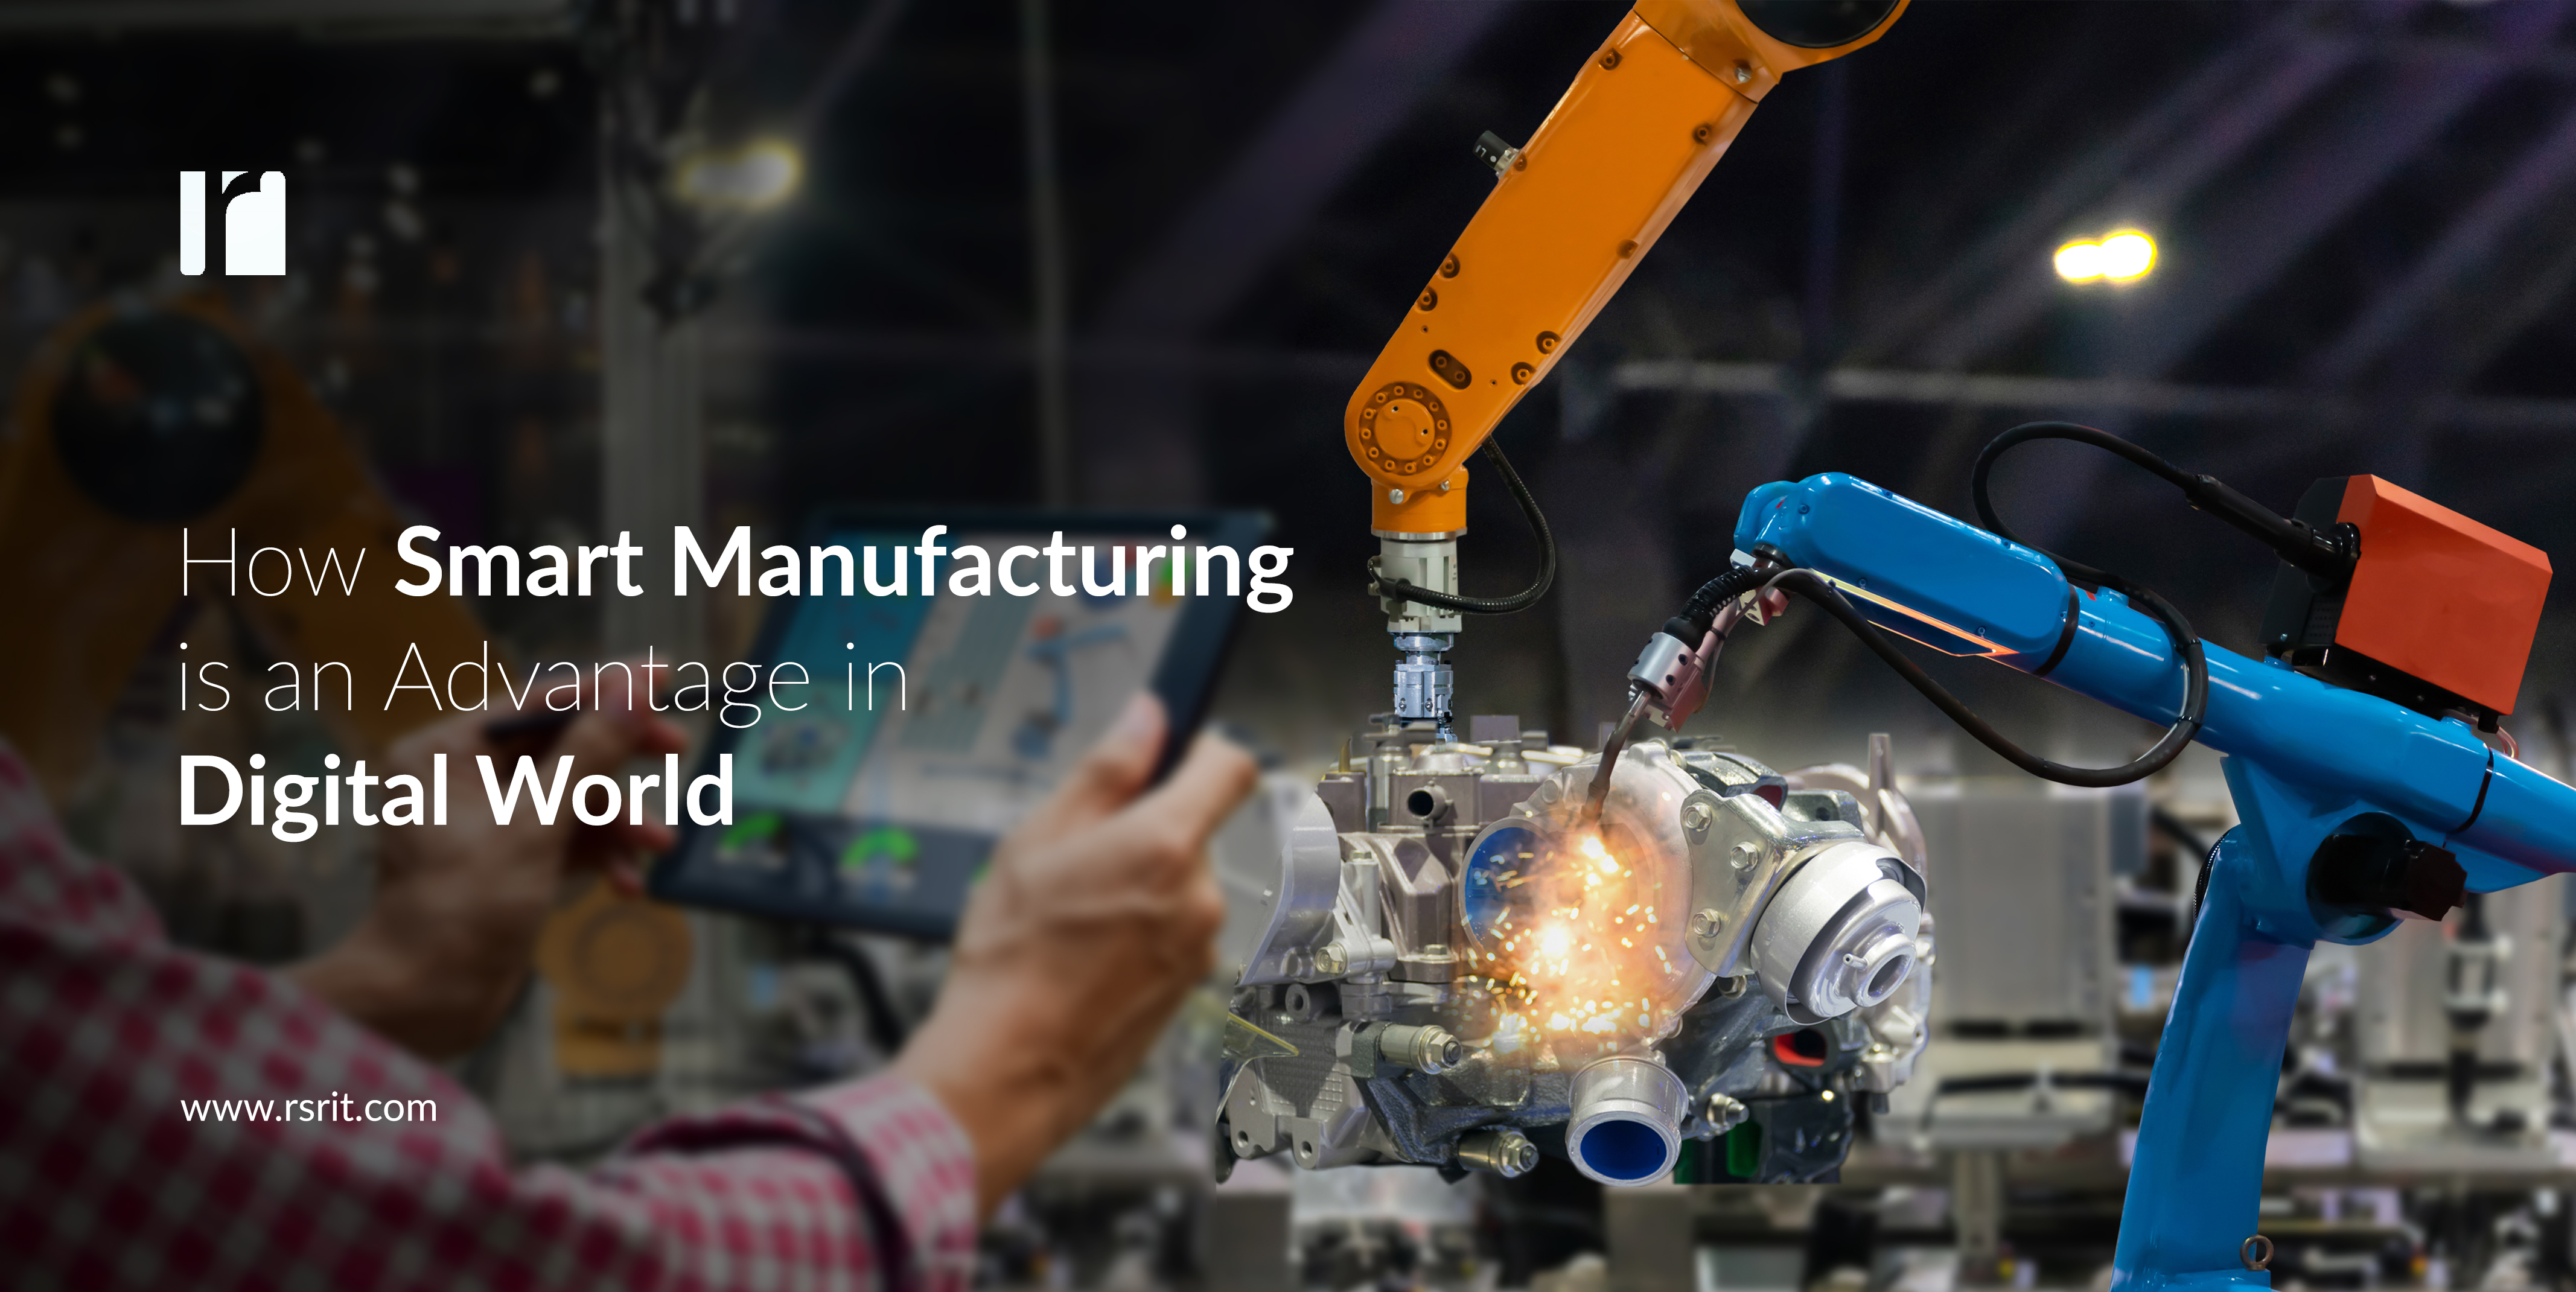 How Smart Manufacturing is an Advantage in Digital World